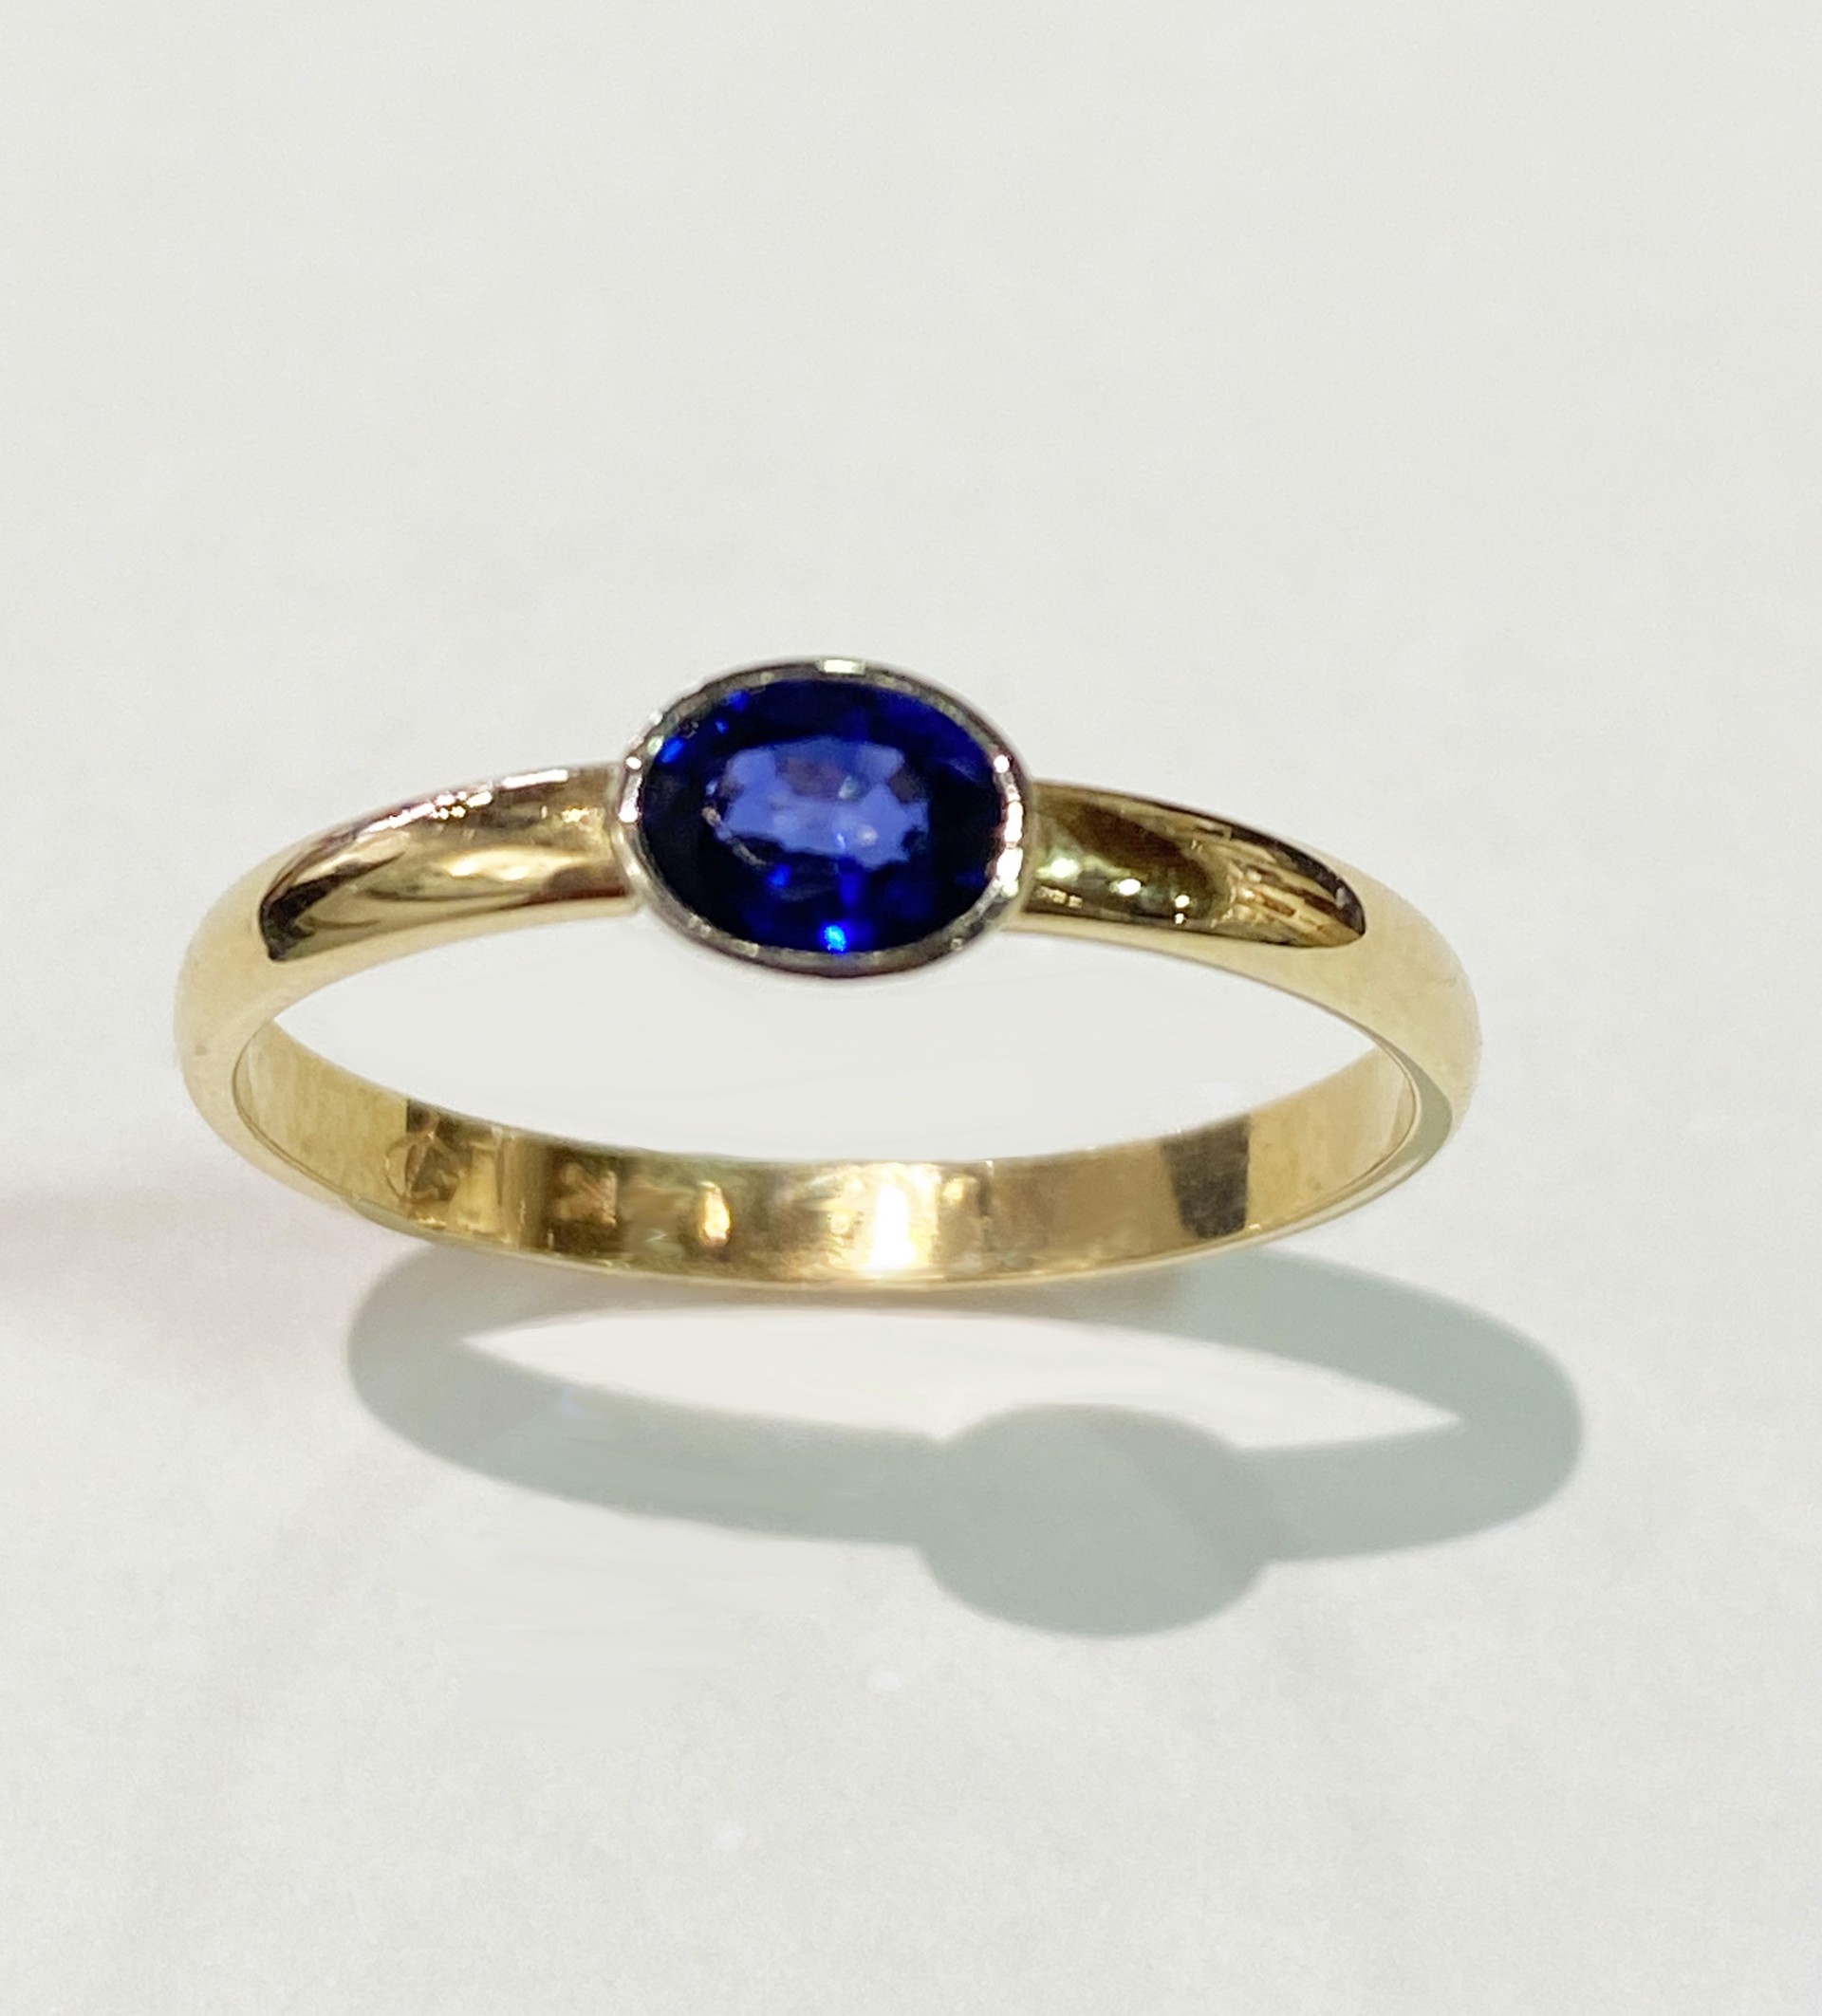 14K Yellow Gold, Sapphire Ring by D'ETTE DELFORGE